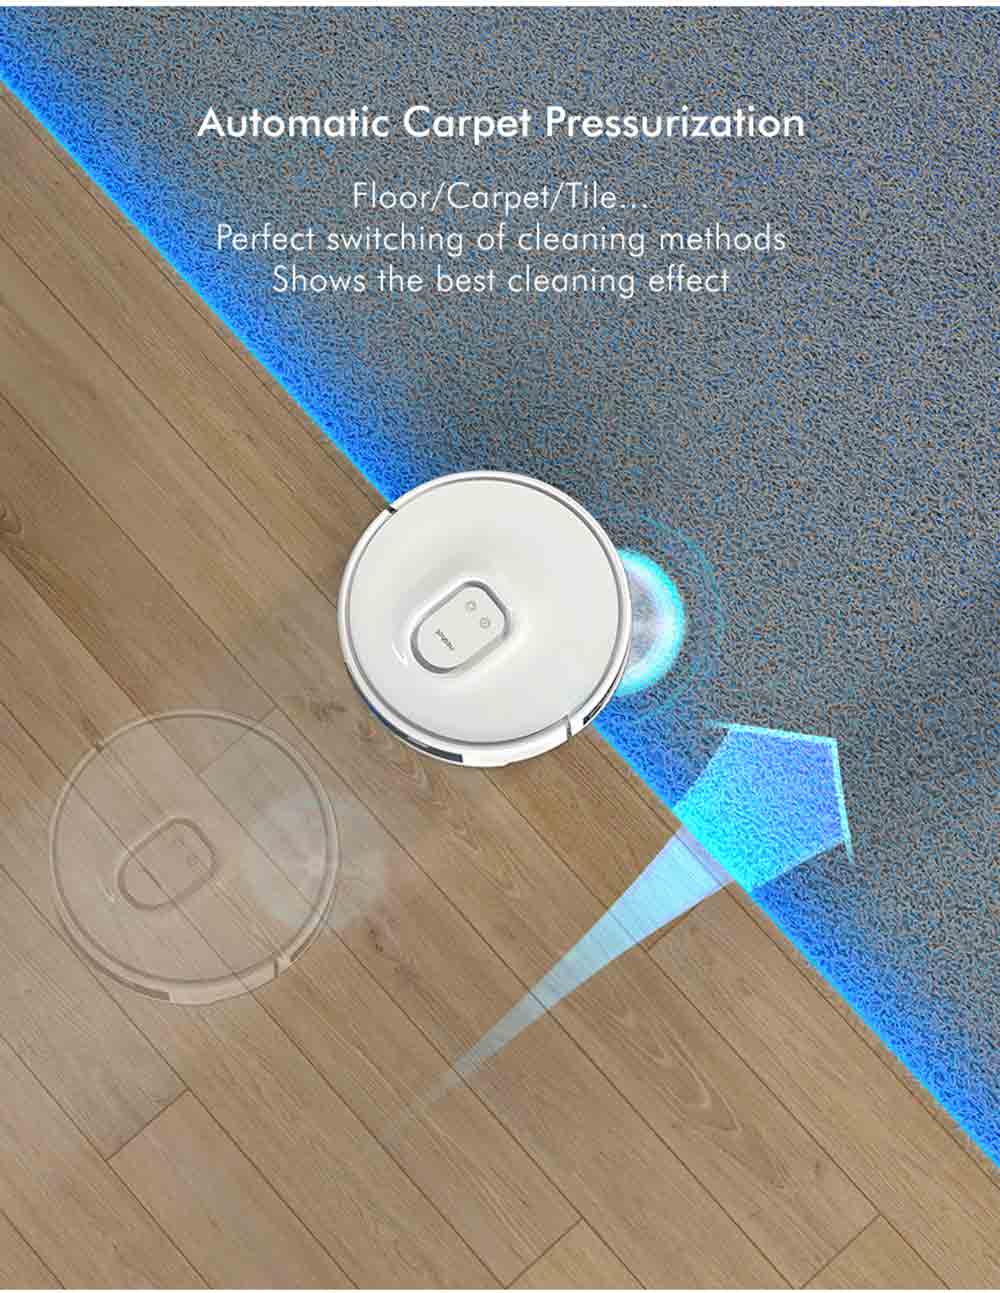 Neabot Q11 Robot Vacuum Cleaner 4000Pa Strong Suction Self Emptying Robotic Vacuum, Wi-Fi / Bluetooth Connectivity